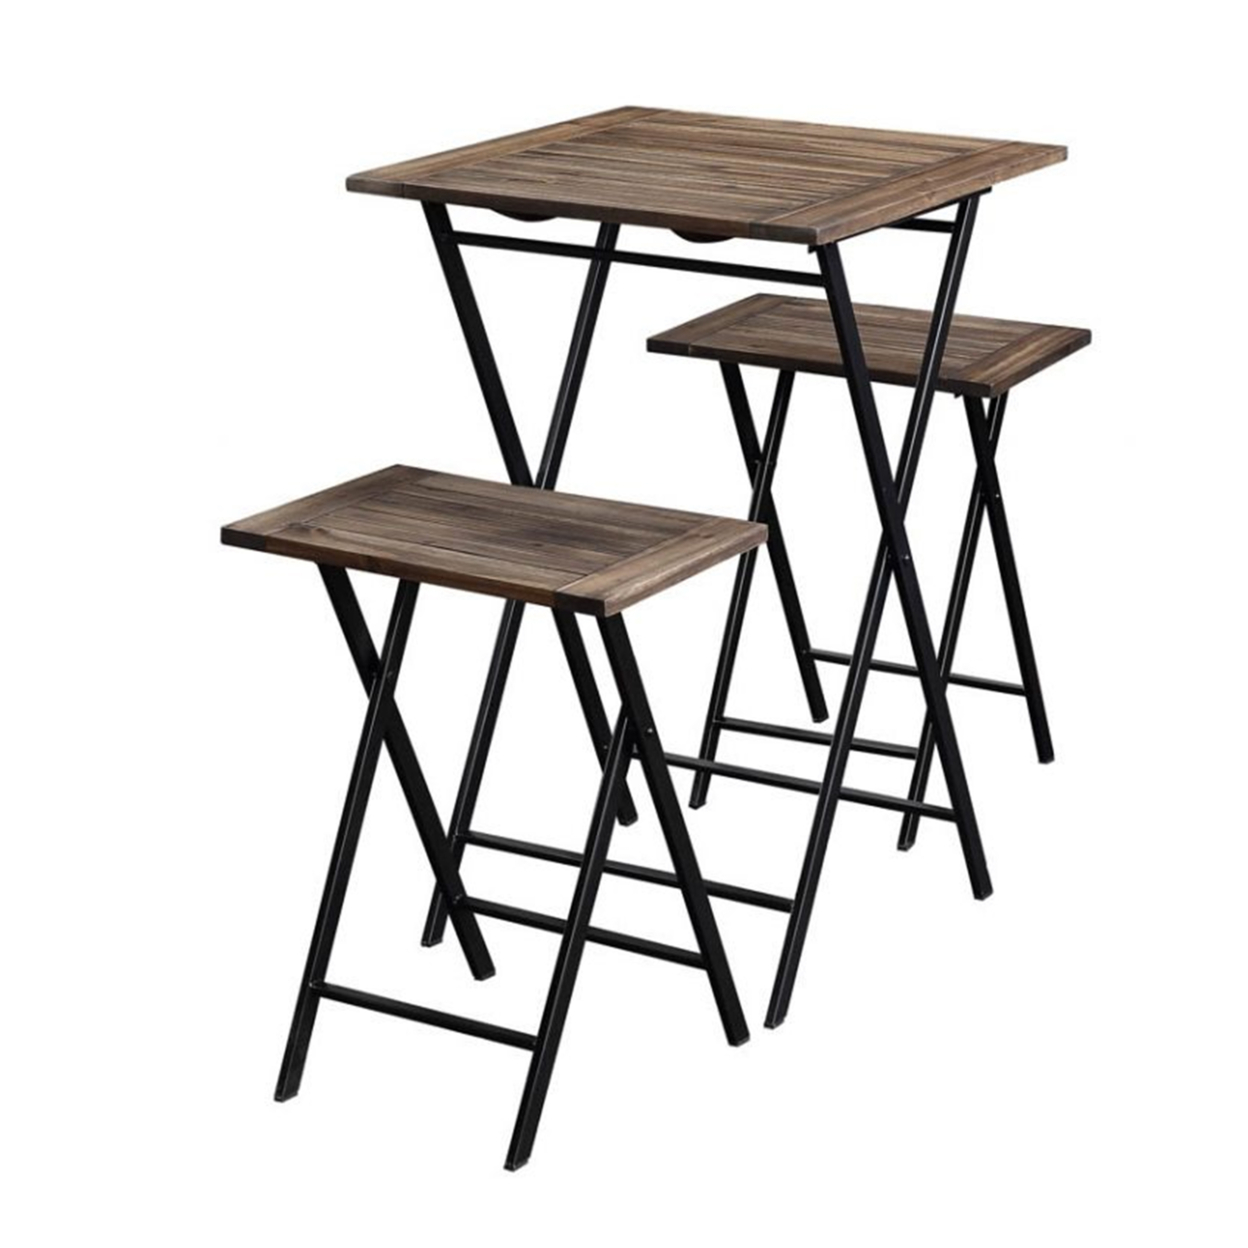 3 Piece Foldable Wood And Metal Dining Set With X Frame Leg,Brown And Black- Saltoro Sherpi